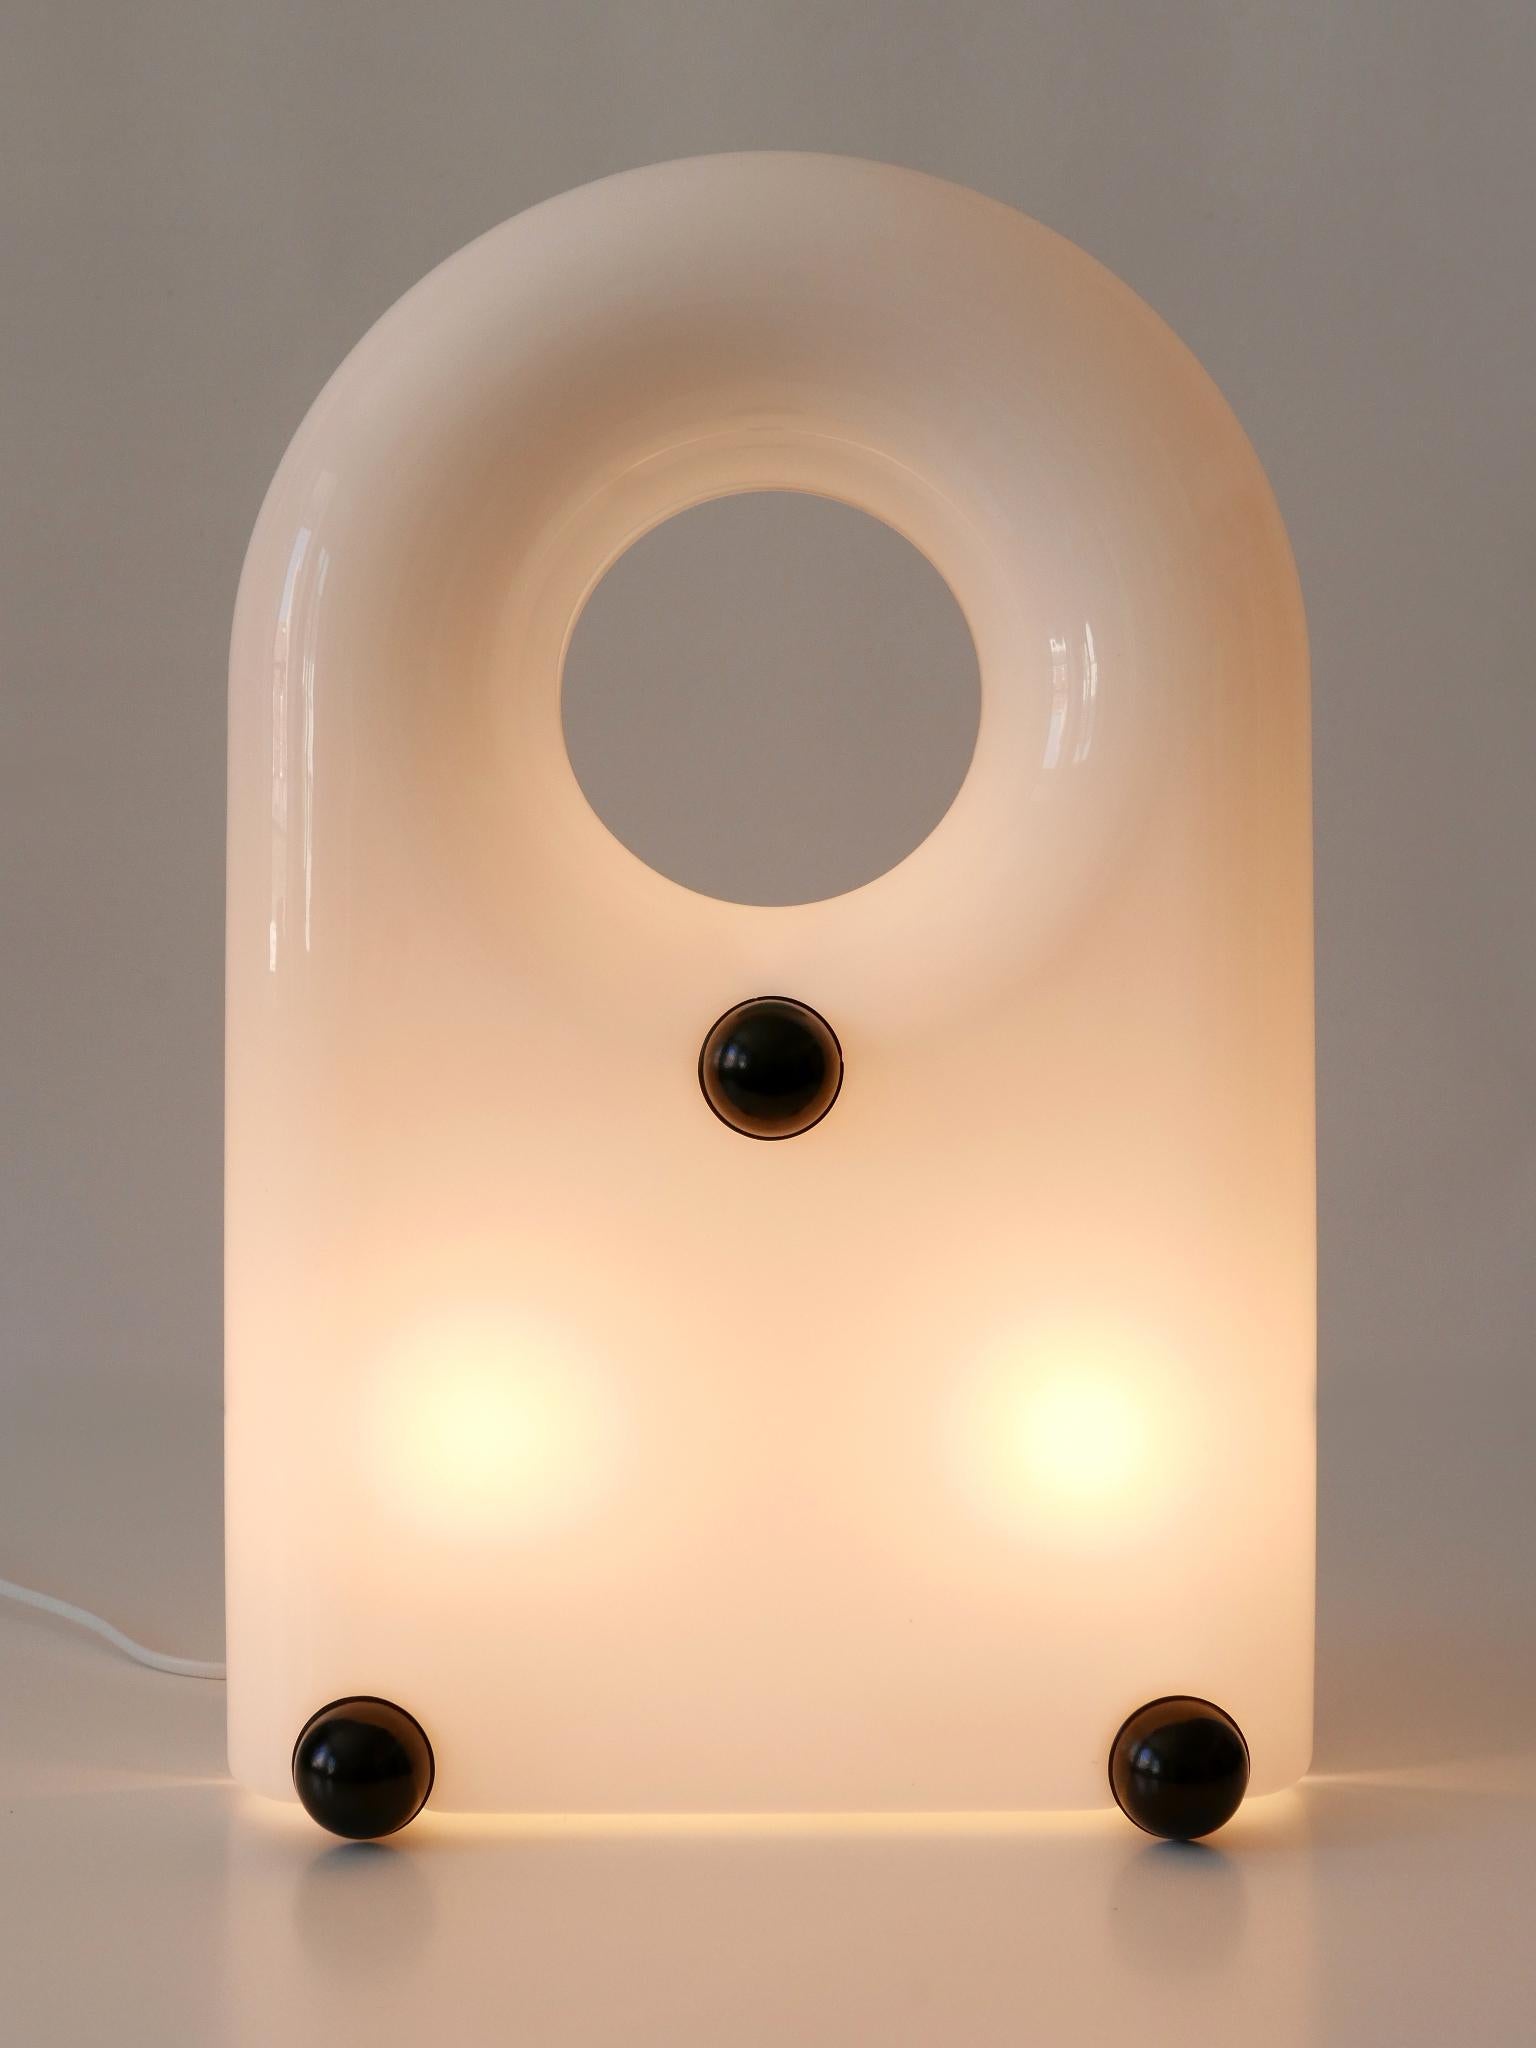 Mid-20th Century Extremely Rare Lucite Table Lamp or Floor Light by Elio Martinelli 1969 Italy For Sale